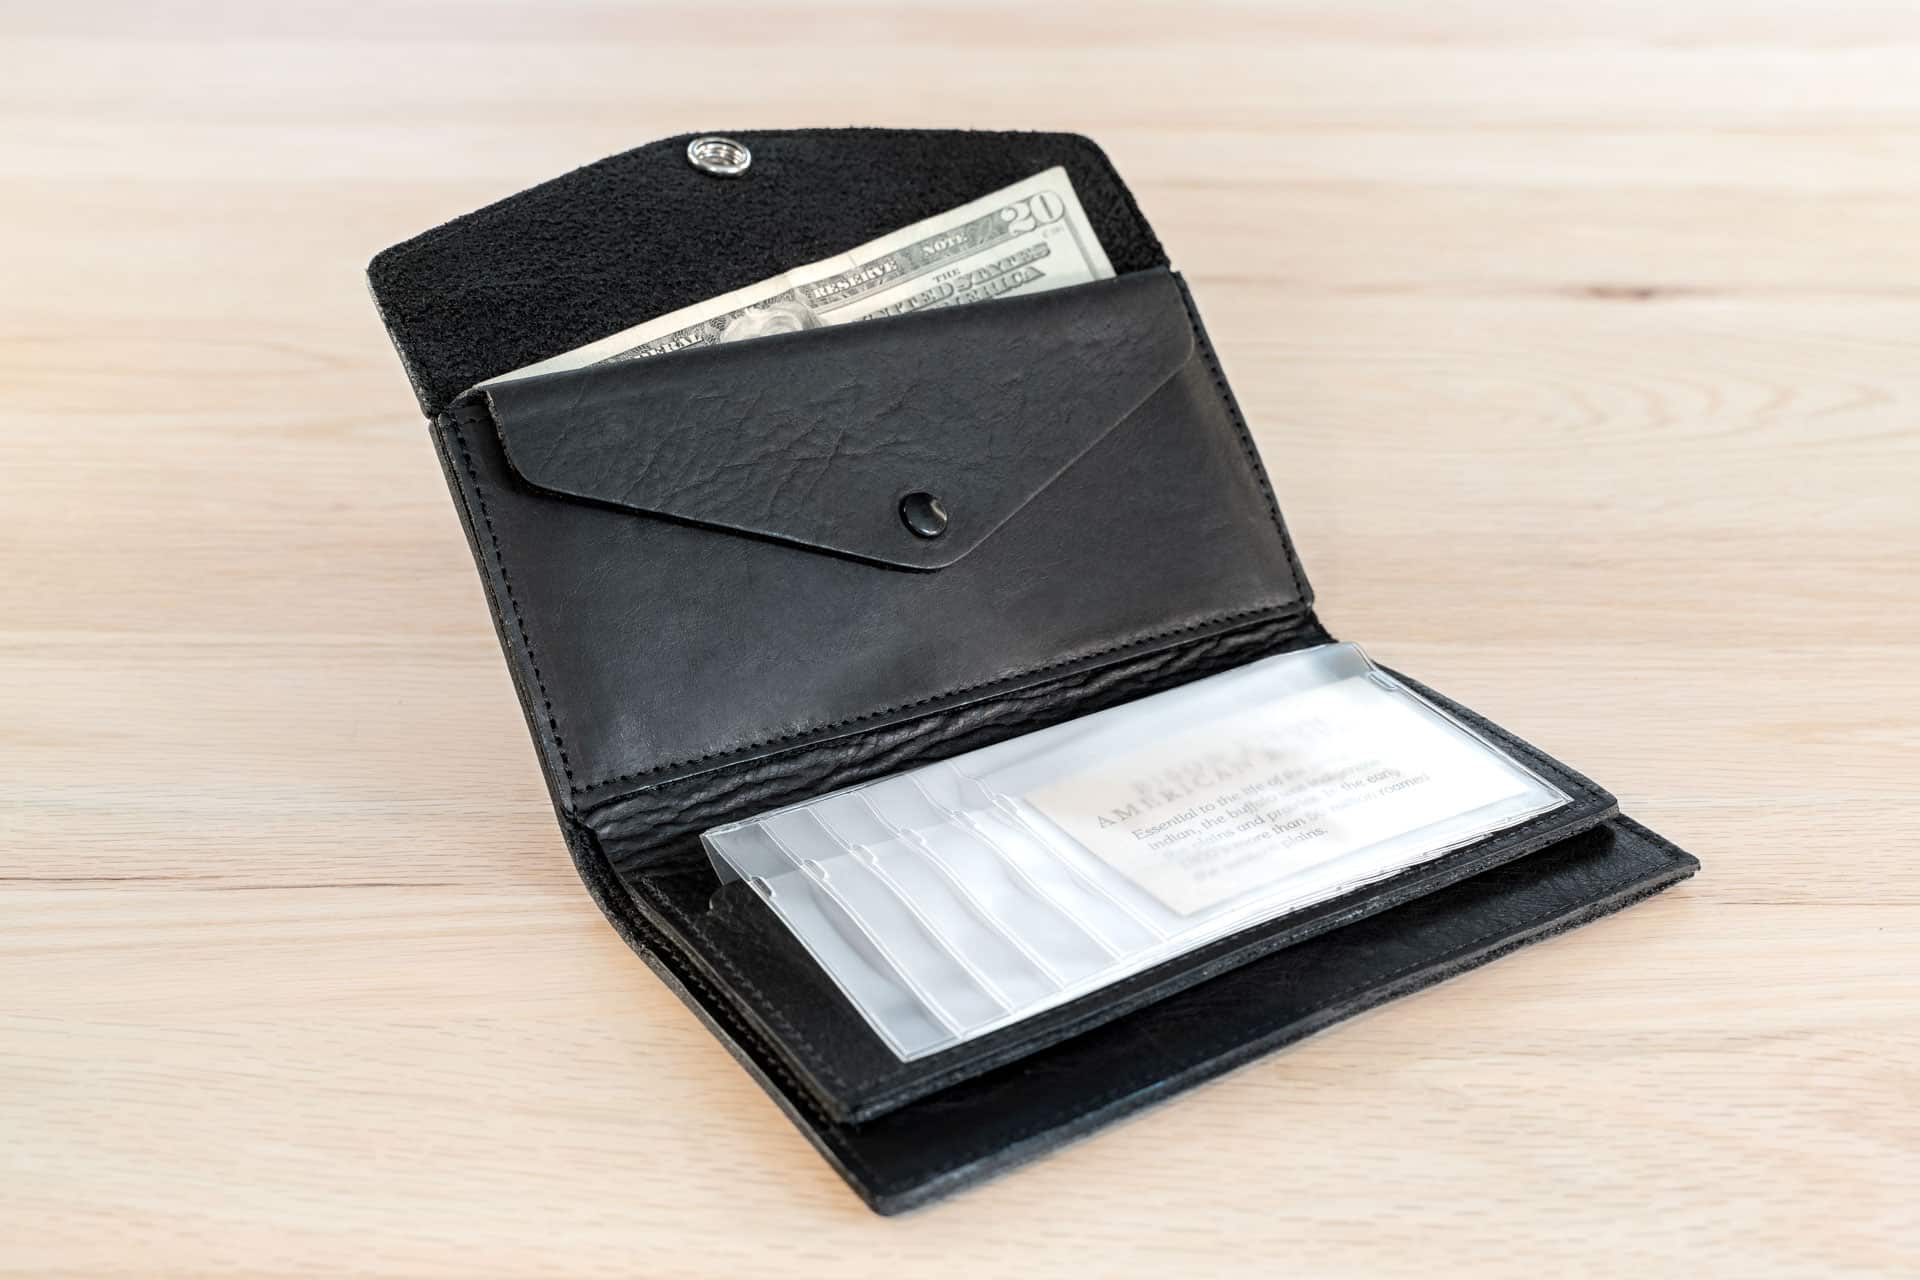 Long Leather Wallet & Organizer for Checks, Cash, Cards, IDs for Men and  Women